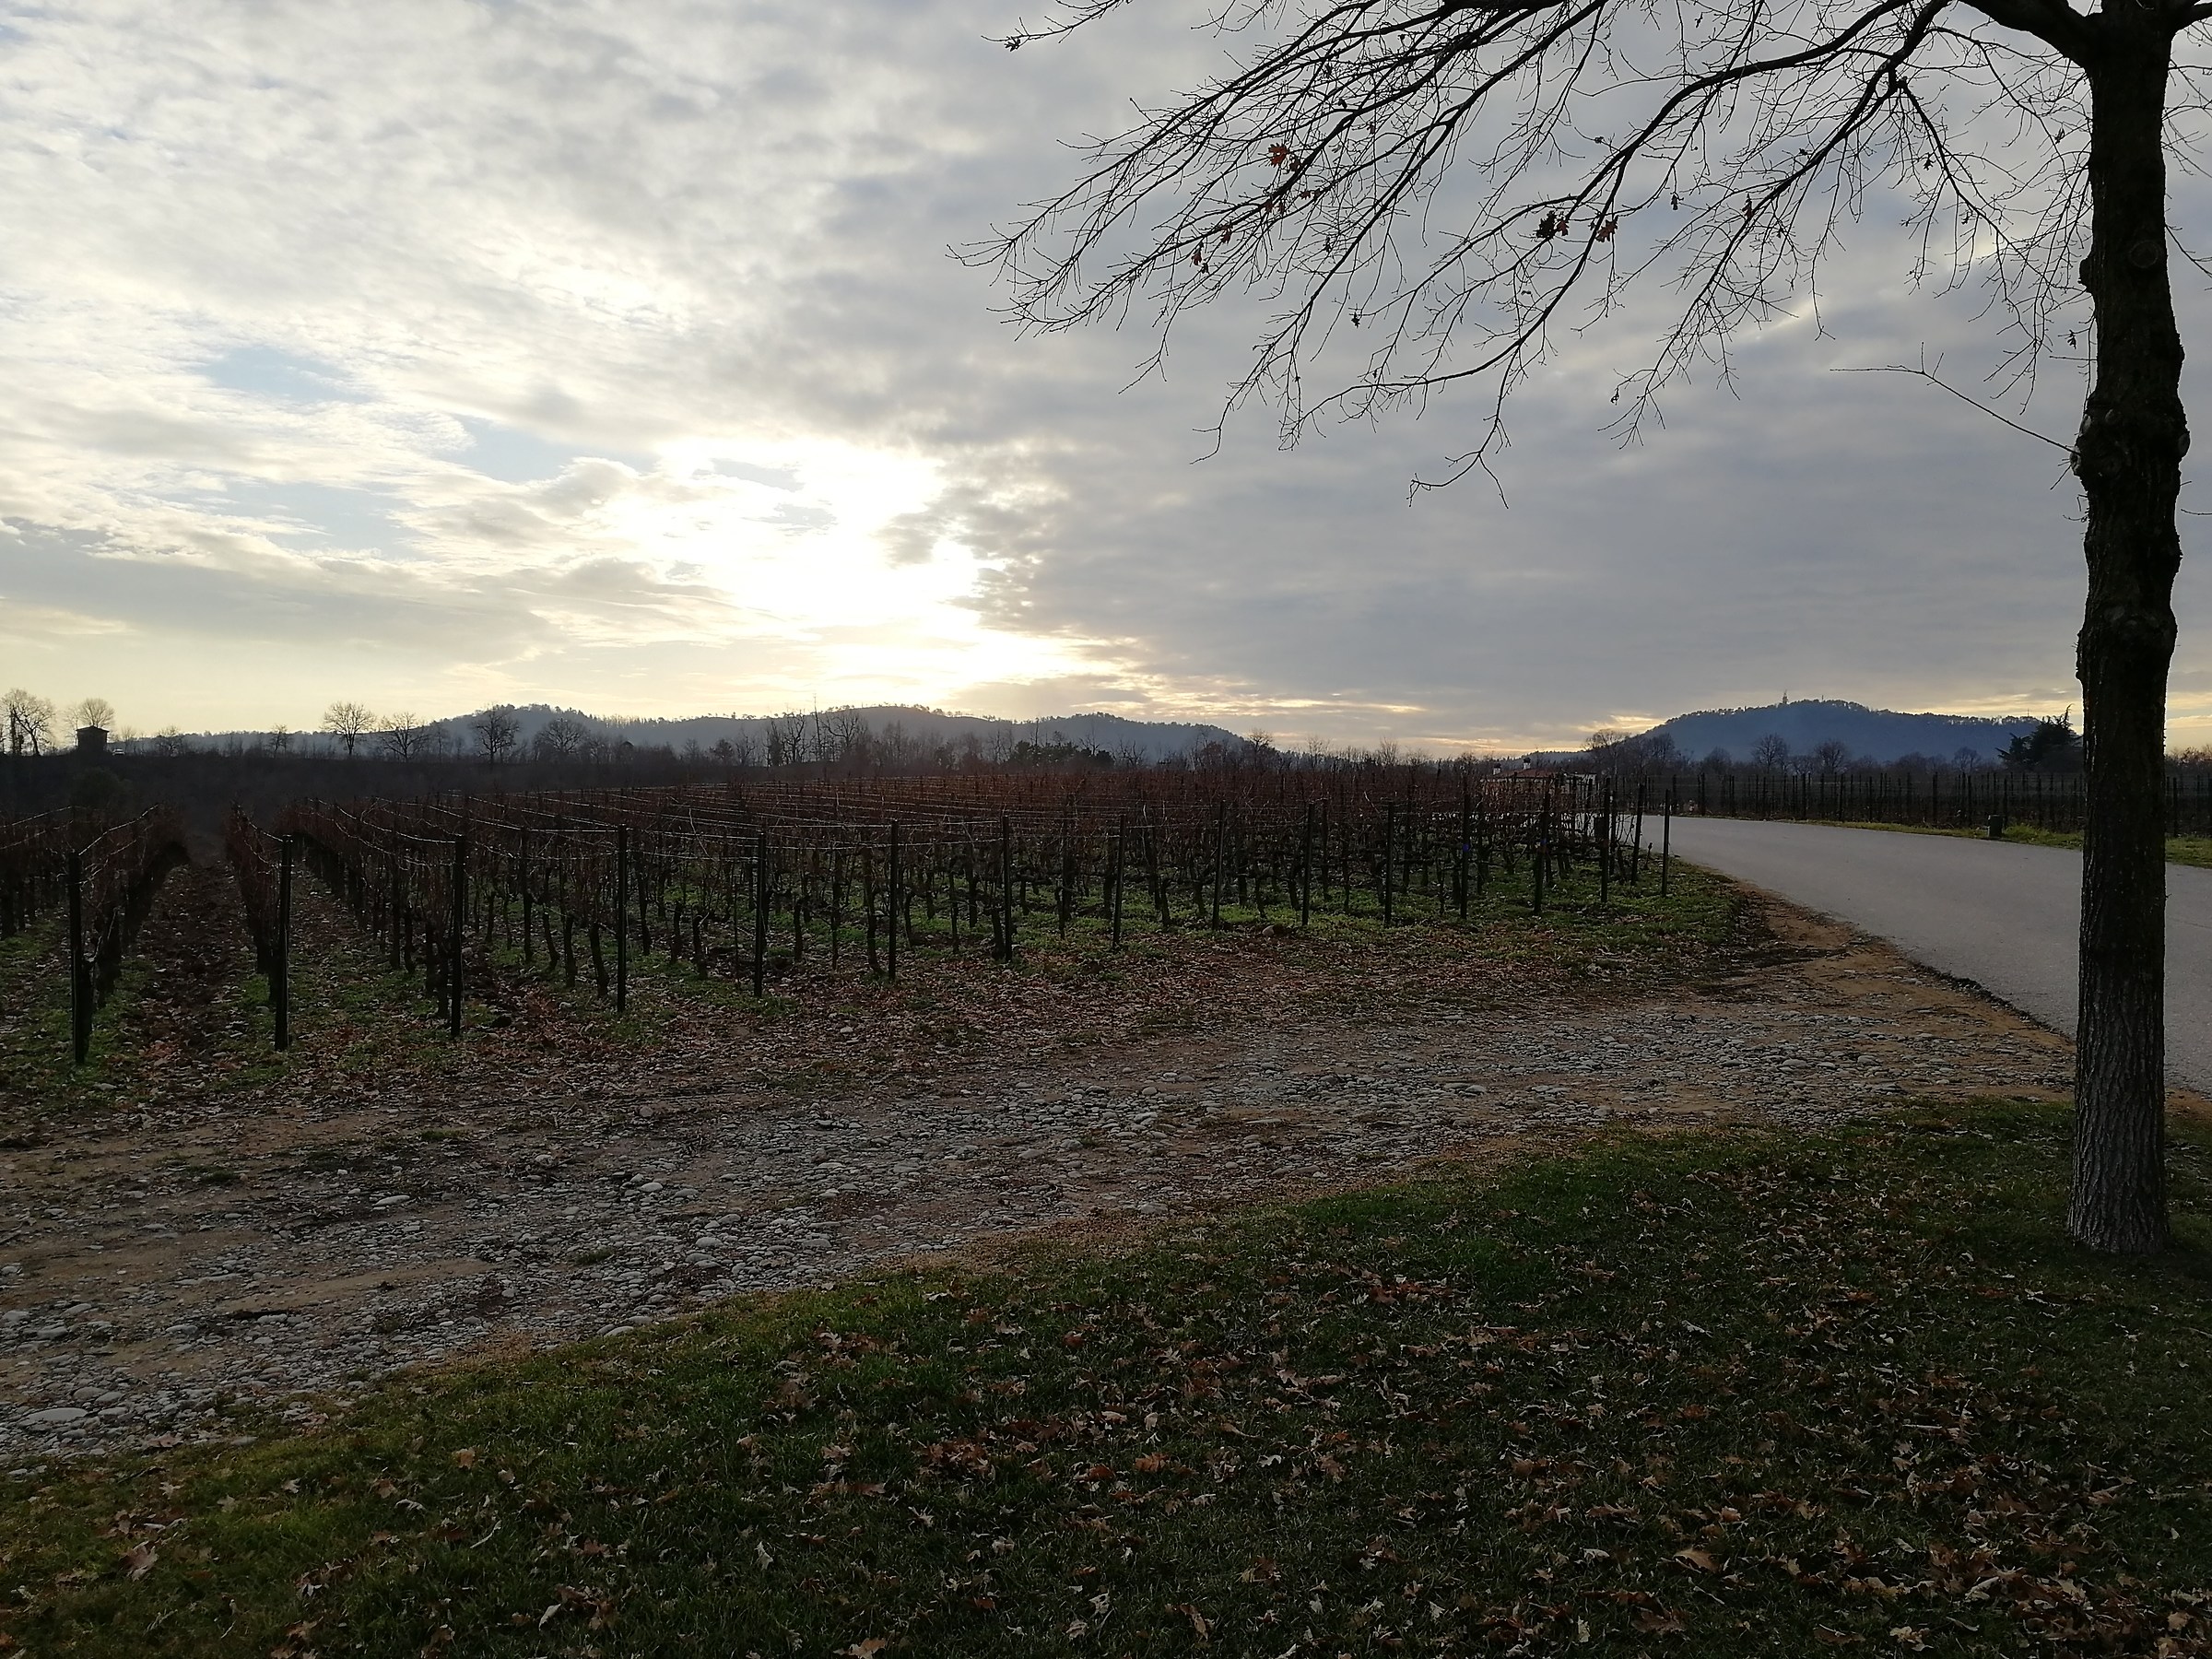 Sunset in the vineyards...